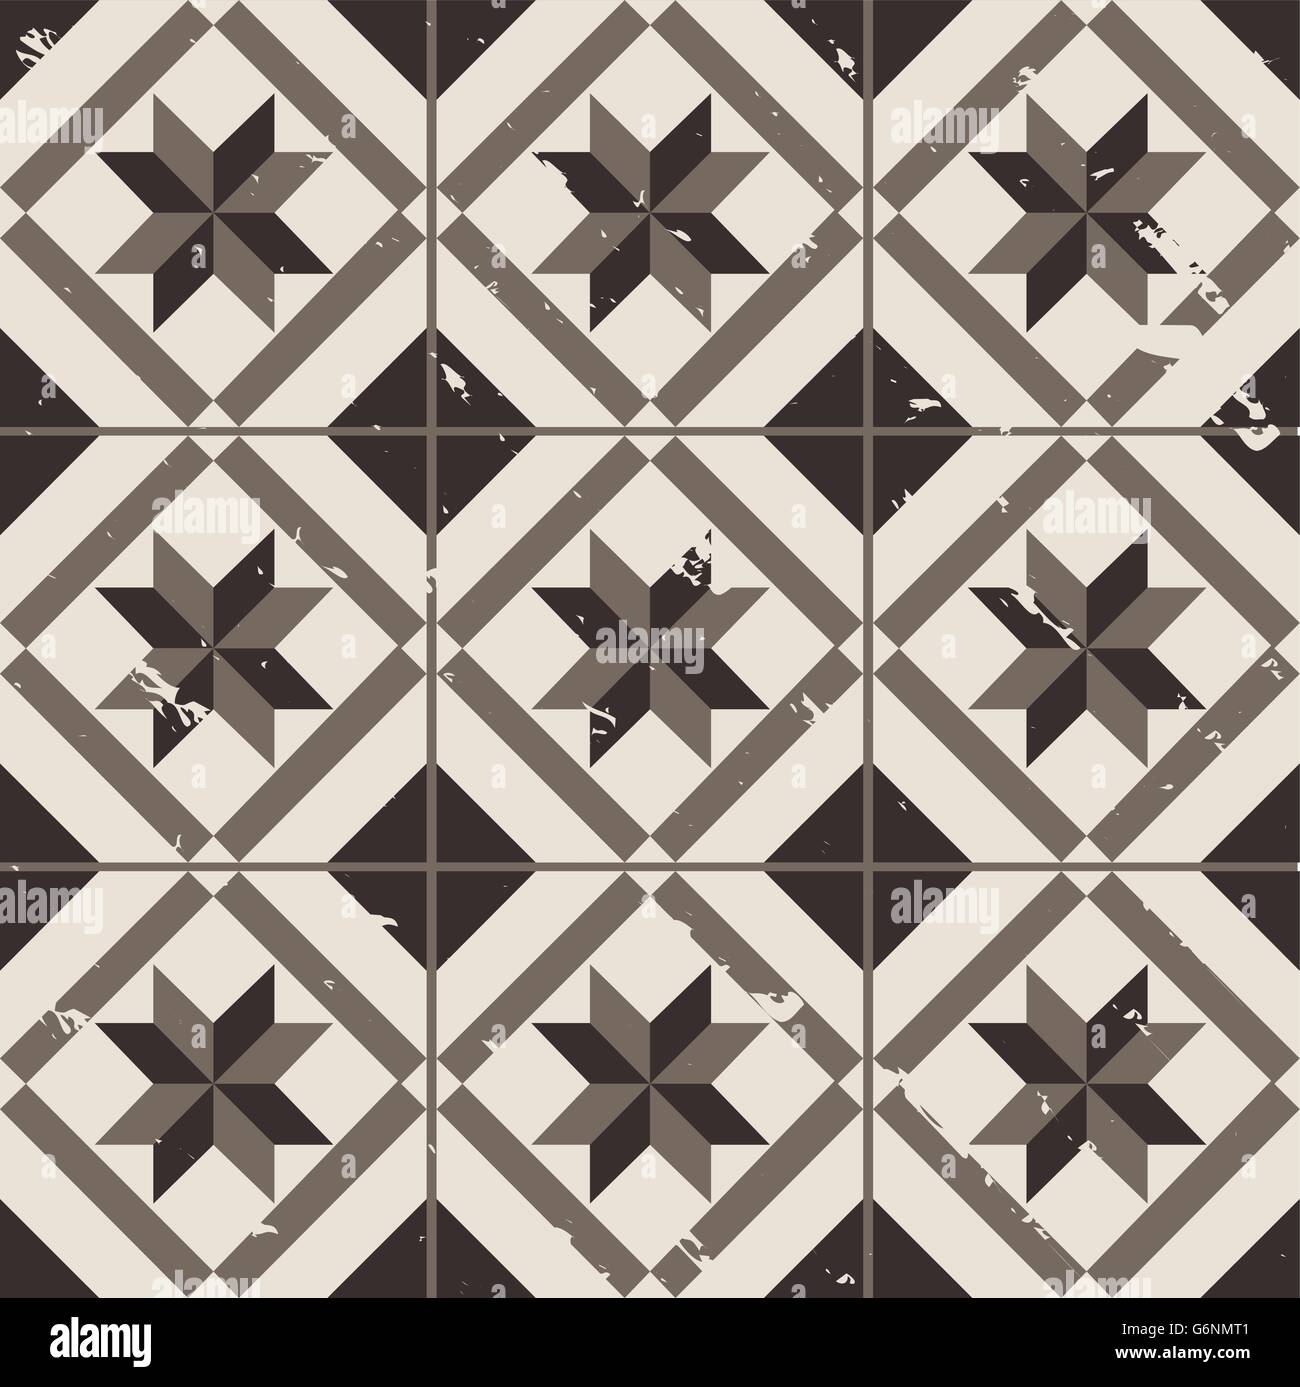 Vintage style cement tile background design Stock Vector